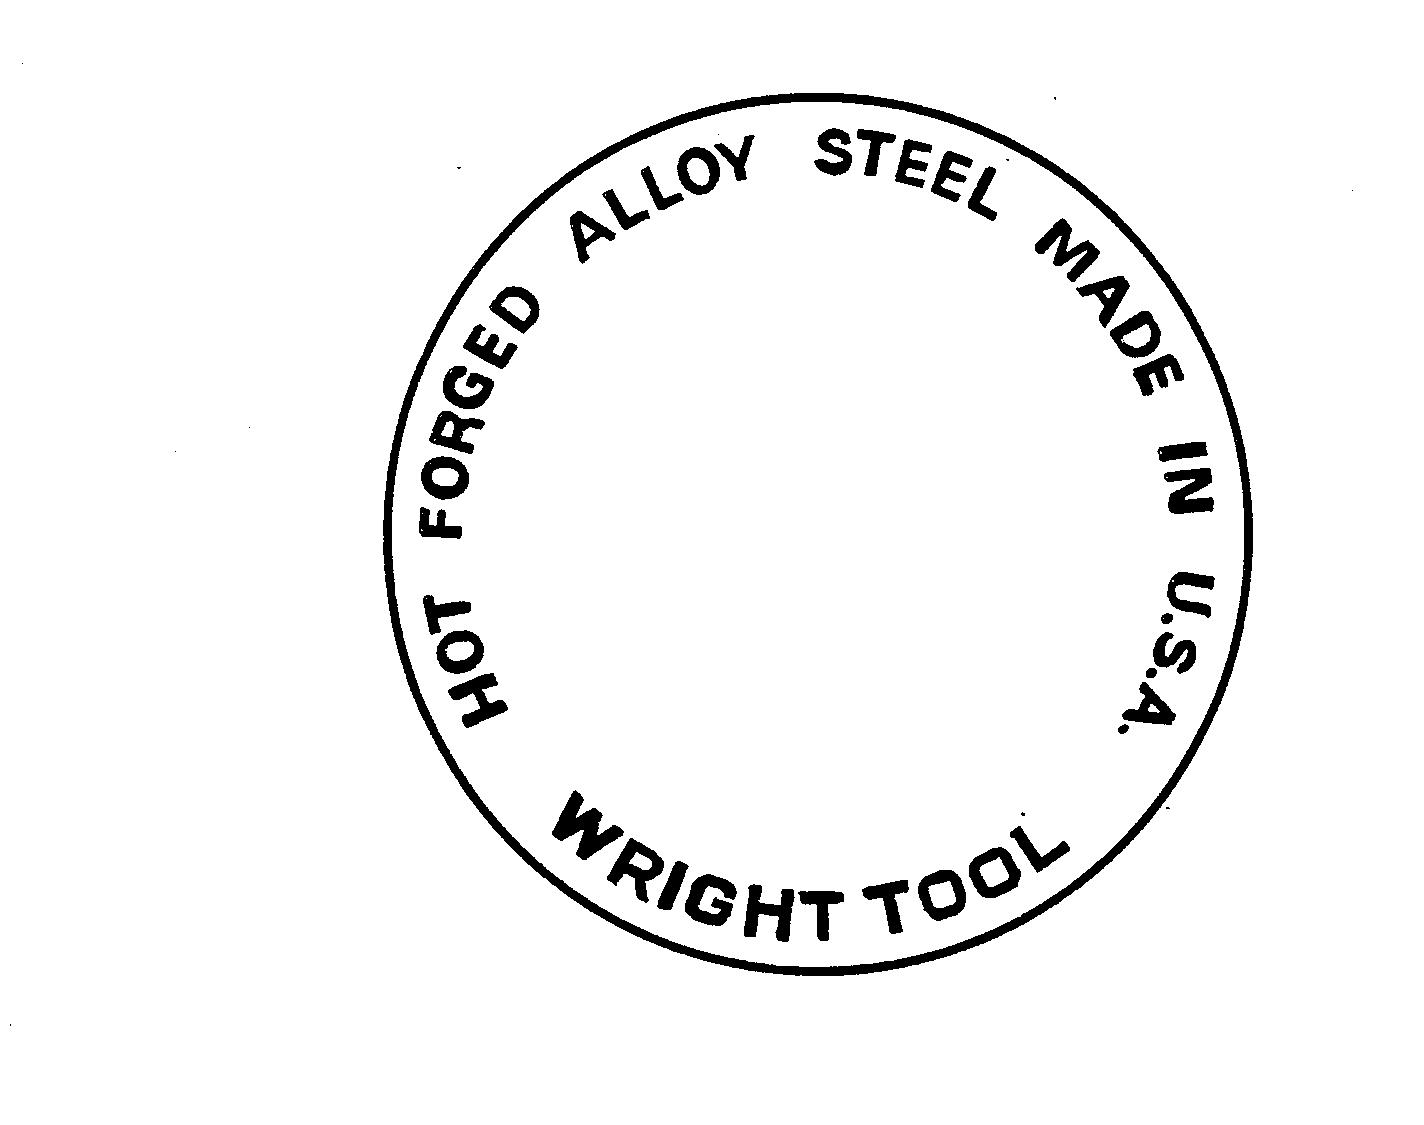  WRIGHT TOOL HOT FORGED ALLOY STEEL MADE IN U.S.A.